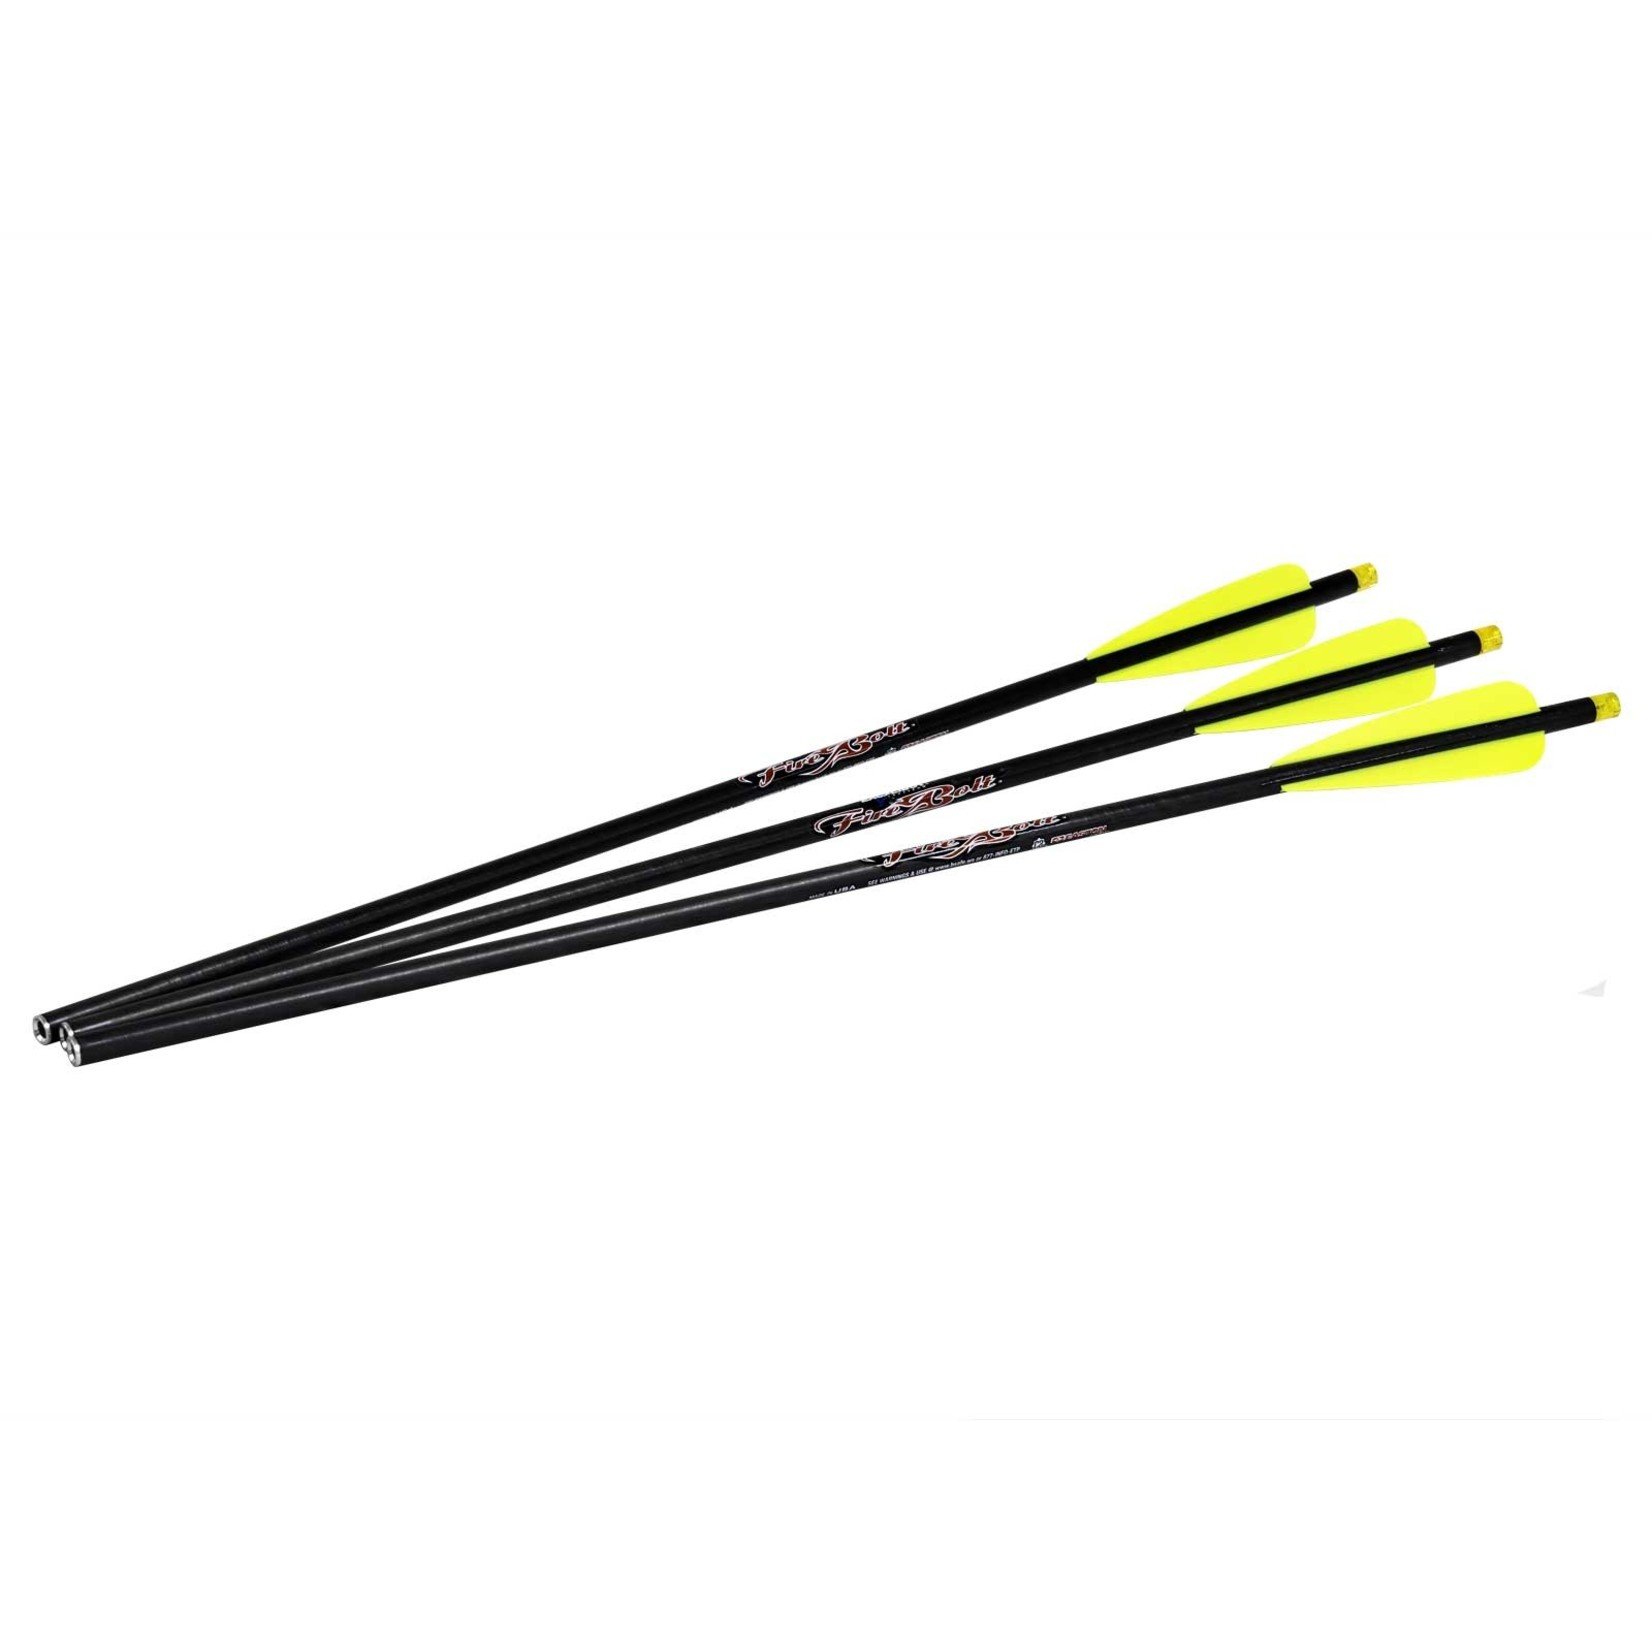 Excalibur Firebolt Illuminated Arrows 20'' (3 Pack) For Use On All Traditional Crossbows